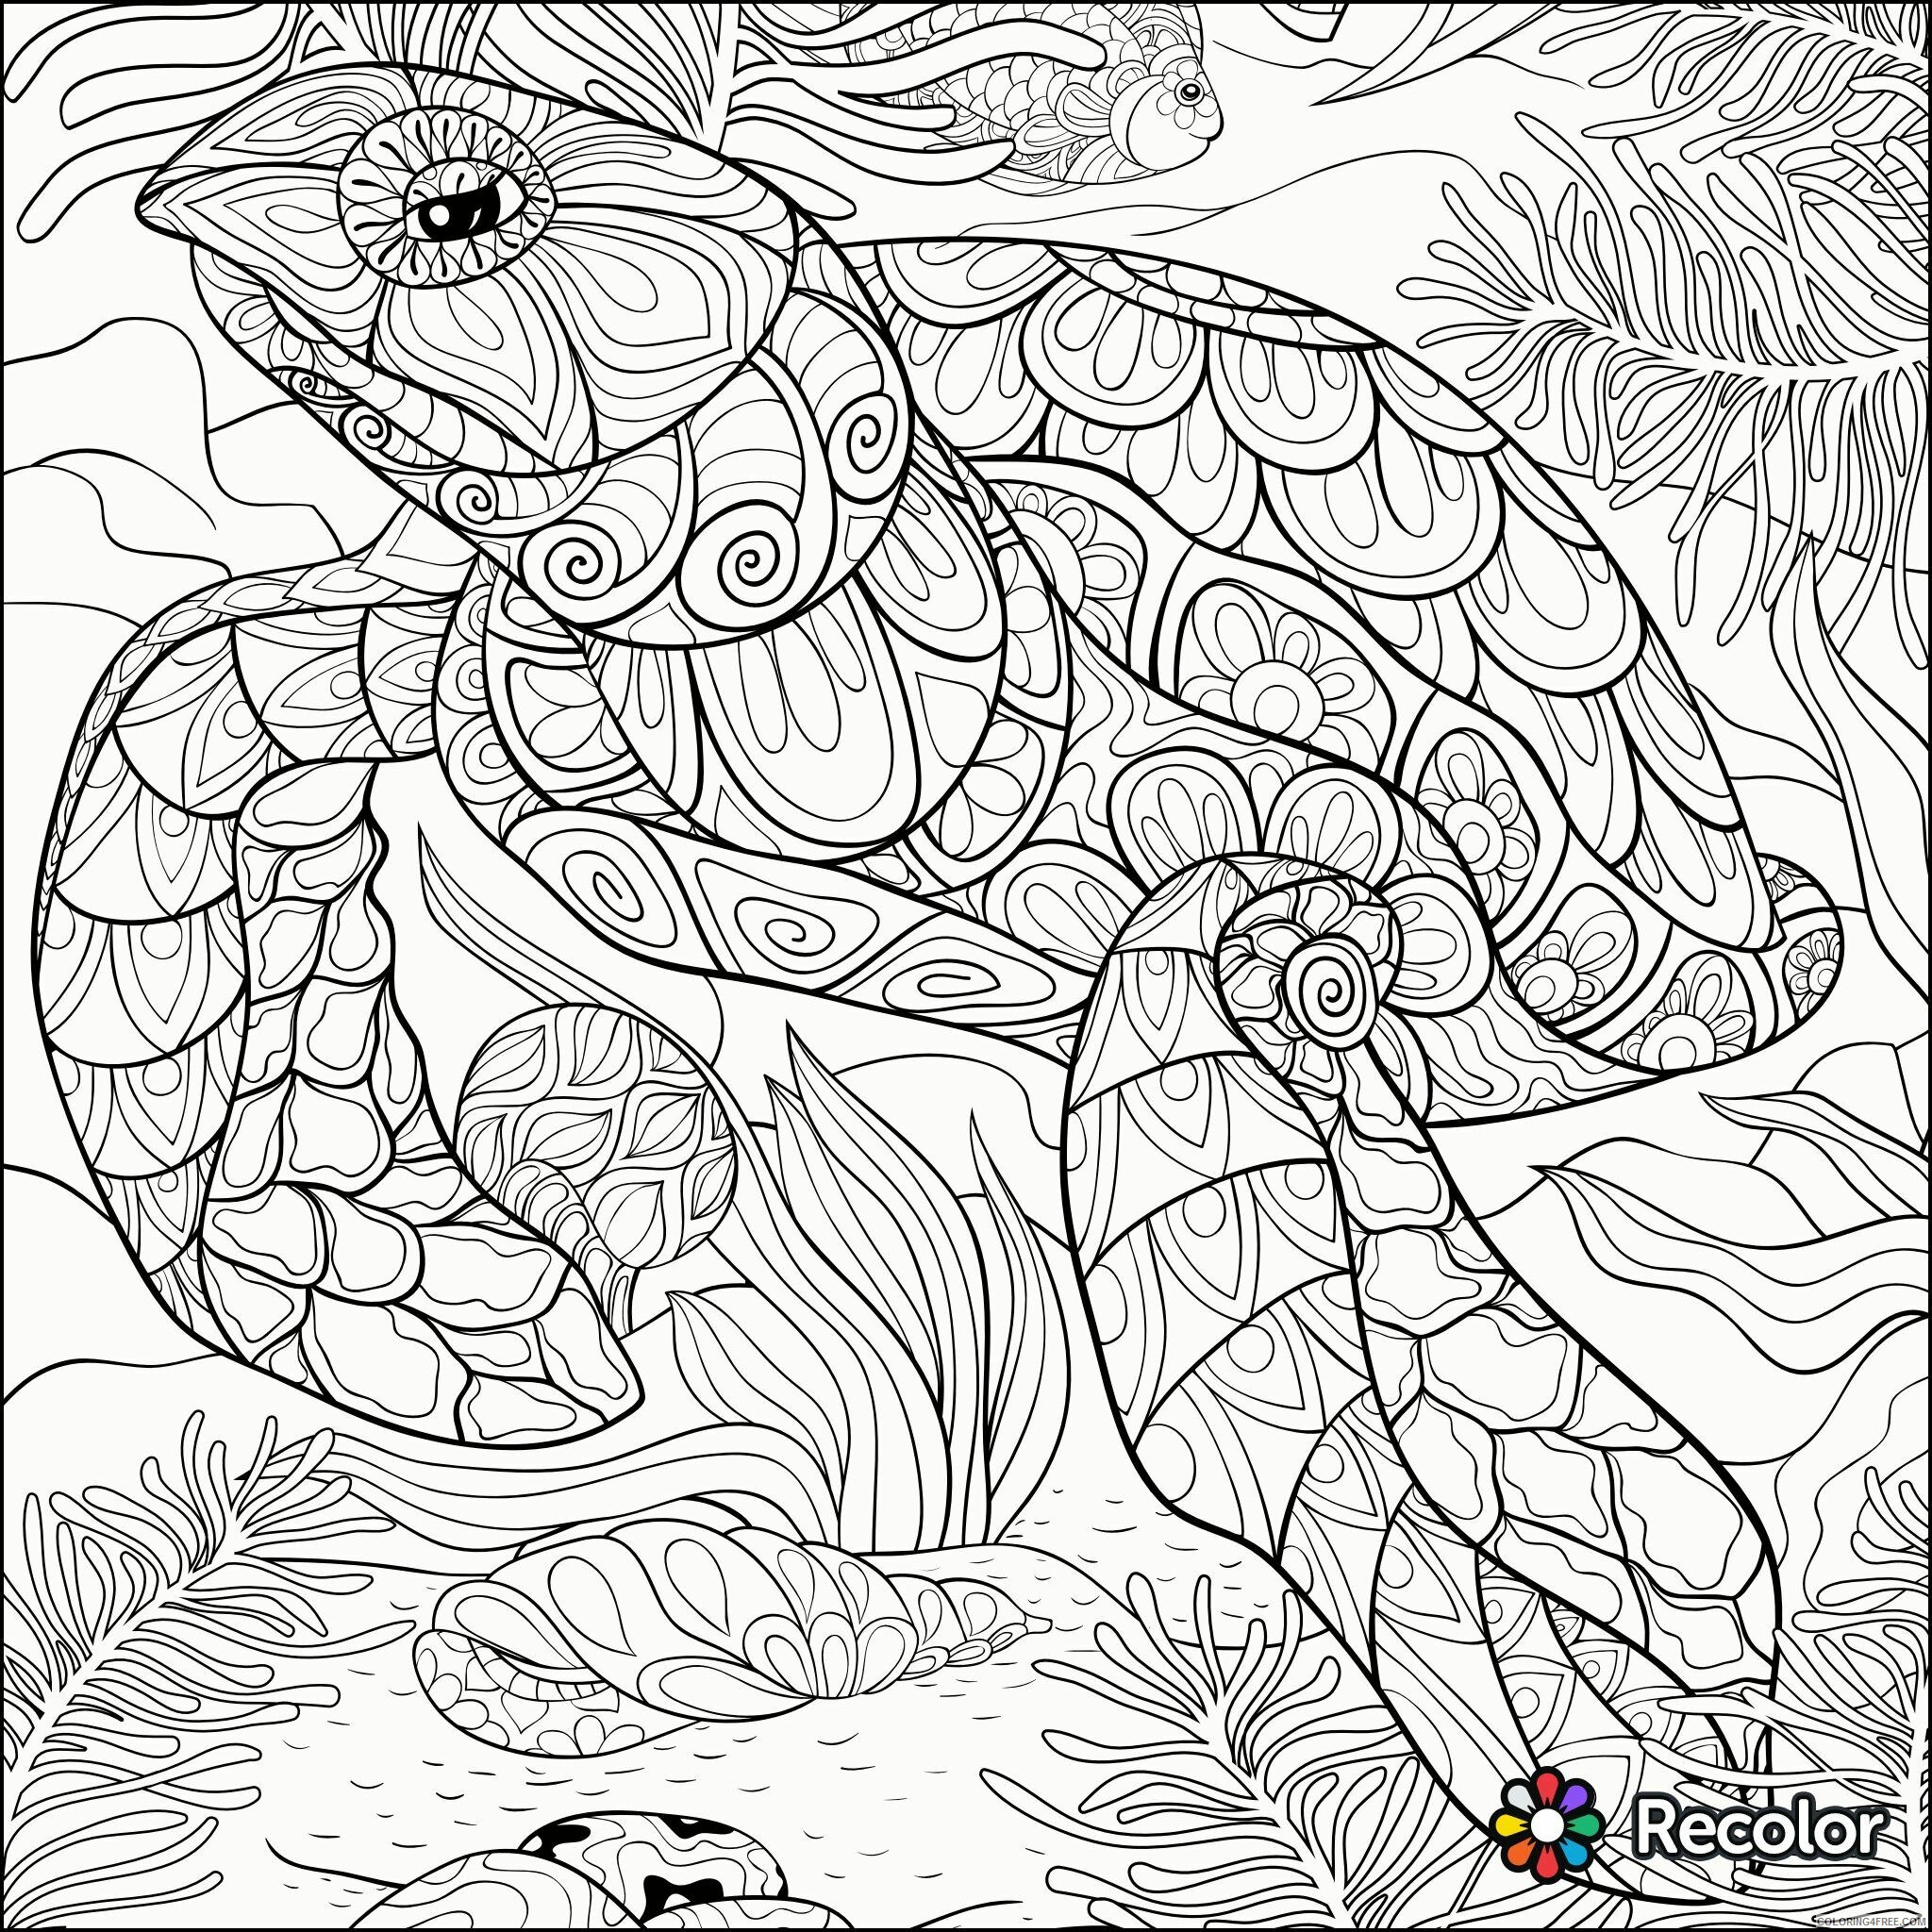 Adult Animal Coloring Pages Printable Sheets Turtle page Recolor app 2021 a 1754 Coloring4free